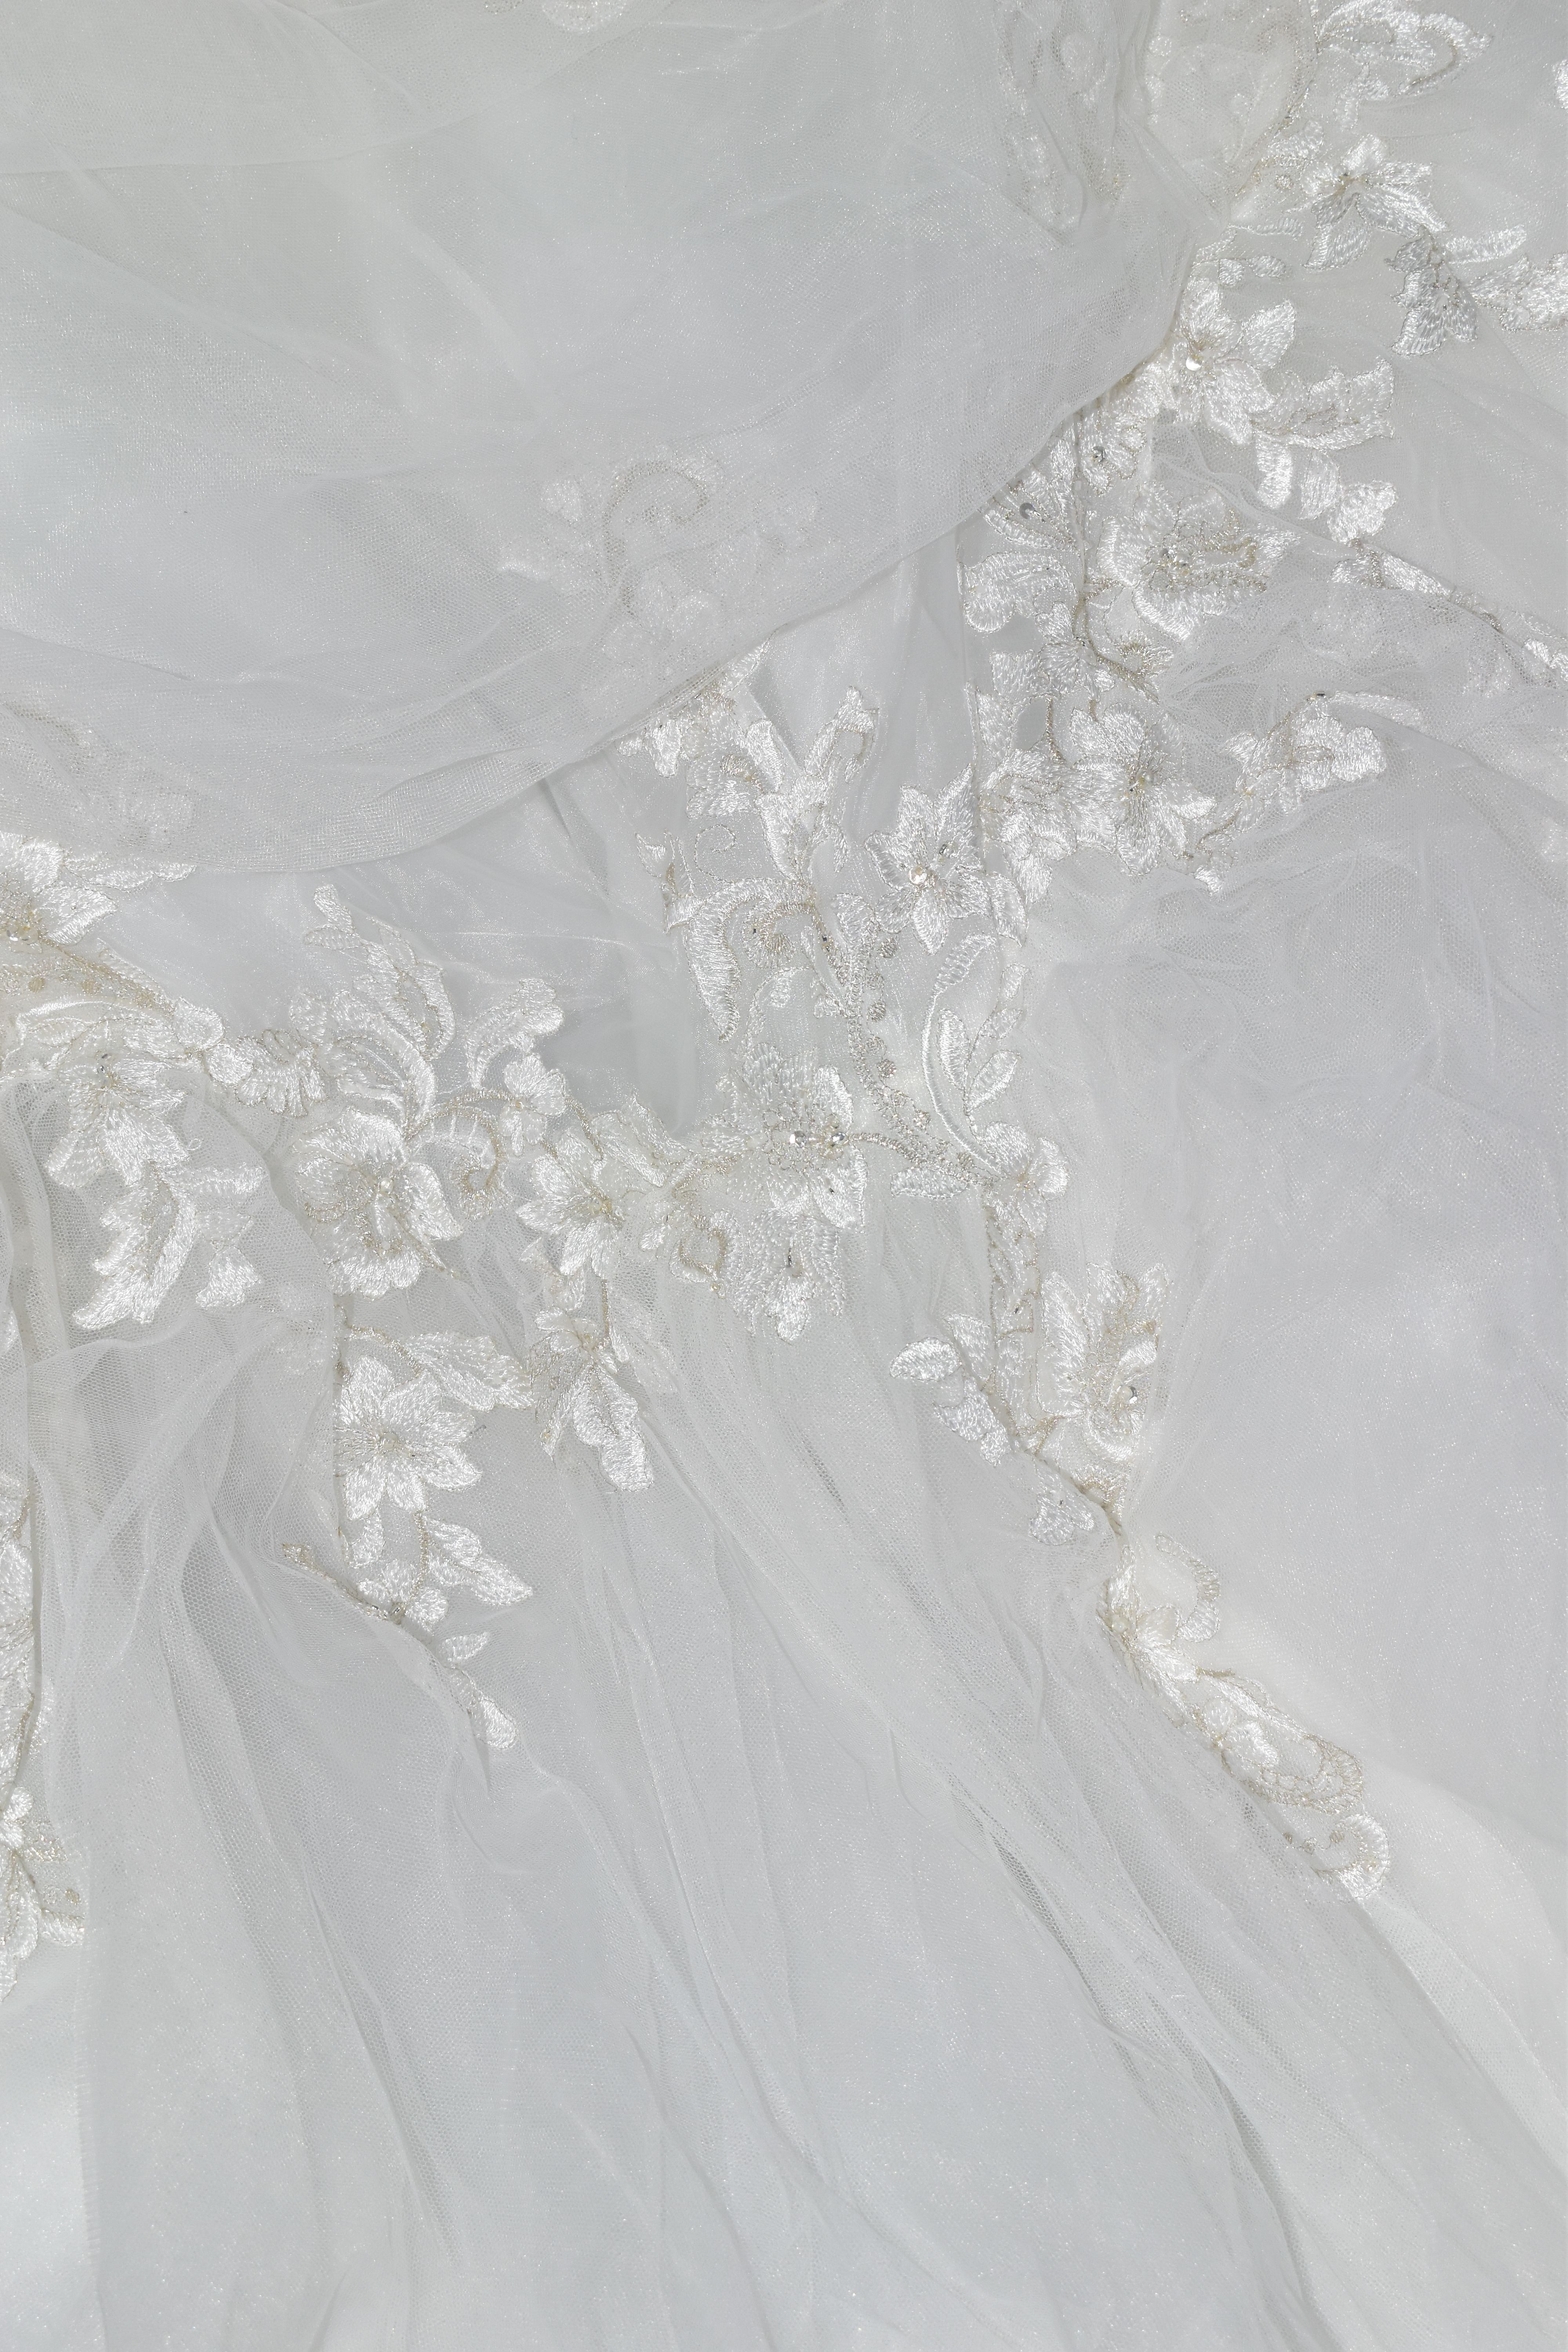 WEDDING DRESS, 'Sophia Tolli', ivory, size 6, beaded appliques, button detail along back, dropped - Image 13 of 16